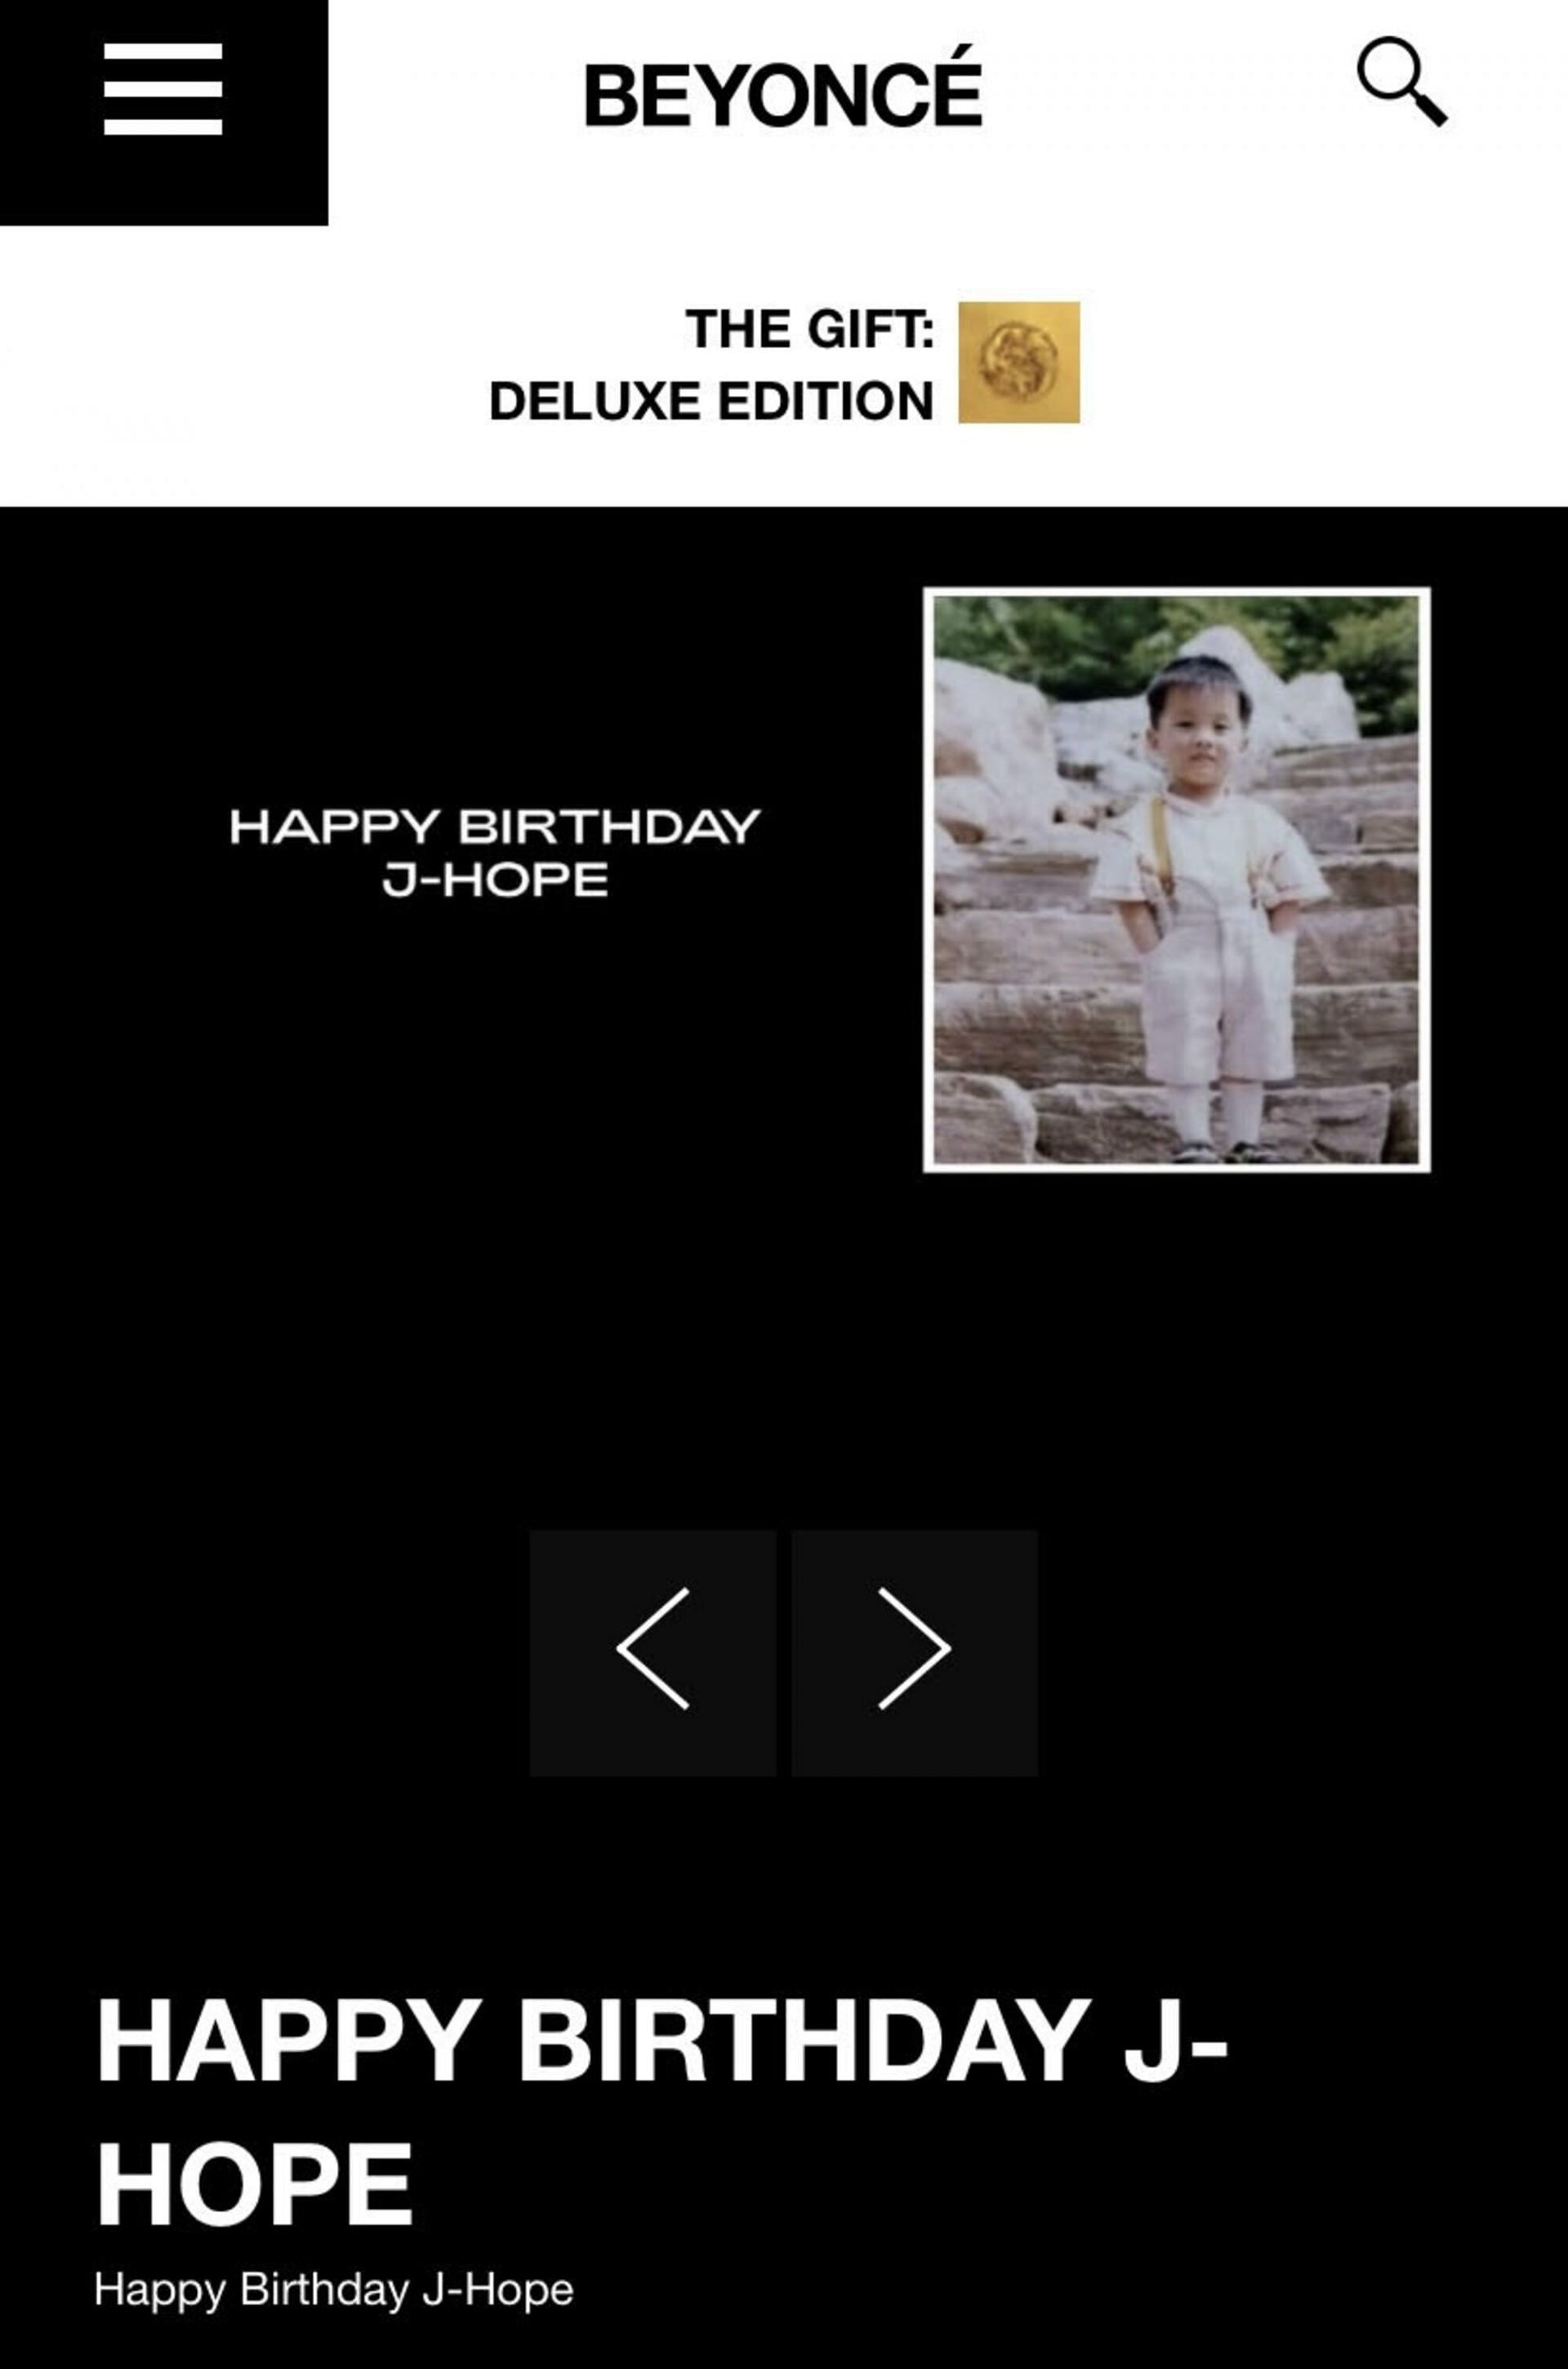 Birthday wishes from Beyonc&eacute; to J-Hope (Image via Beyonc&eacute;&rsquo;s official website)